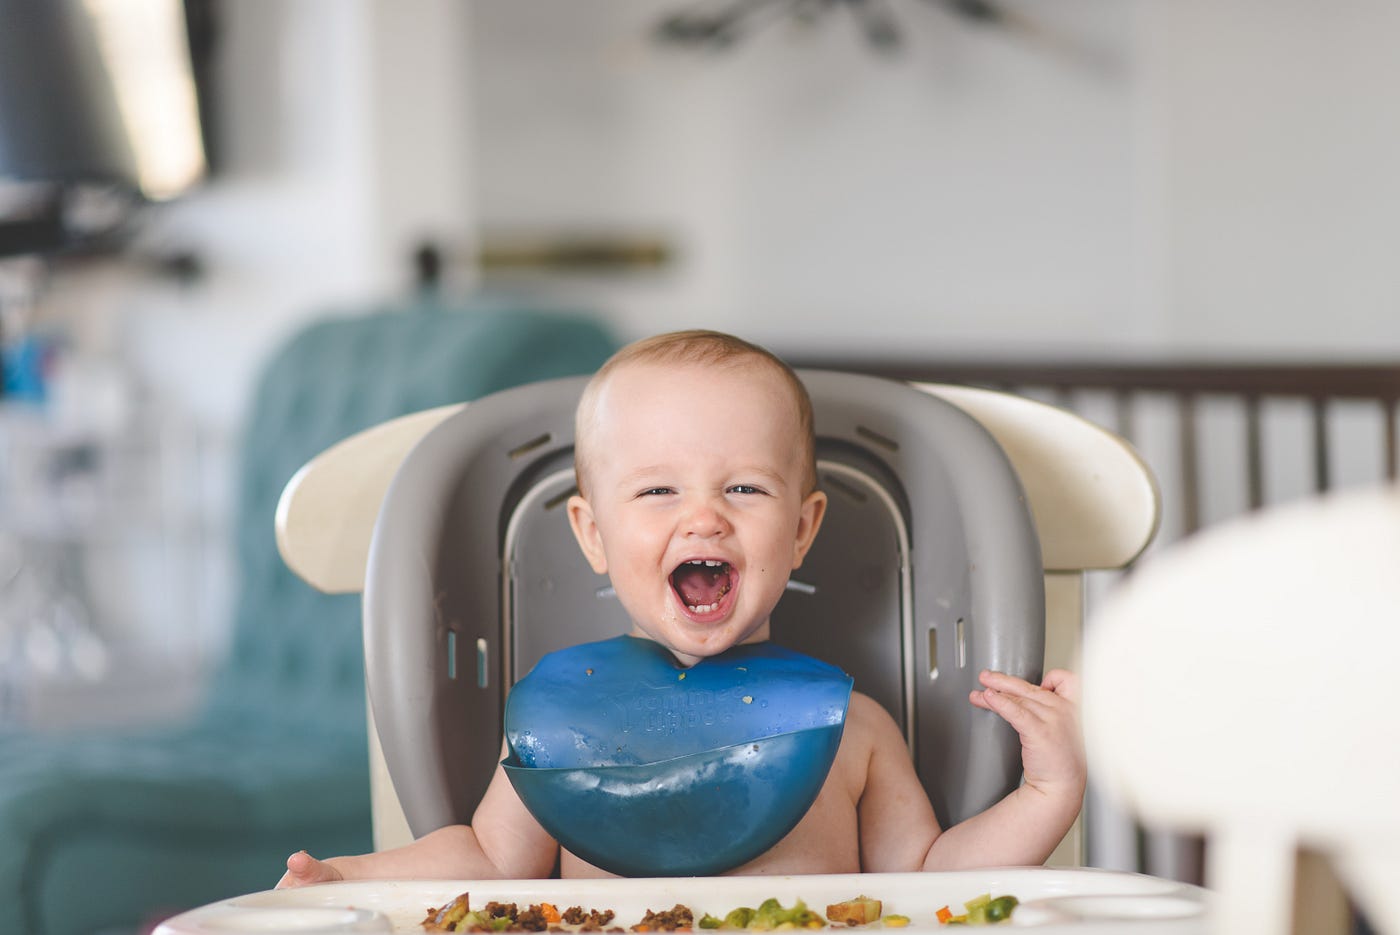 Buy OXO Tot Waterproof Silicone Roll Up Bib with Comfort-Fit